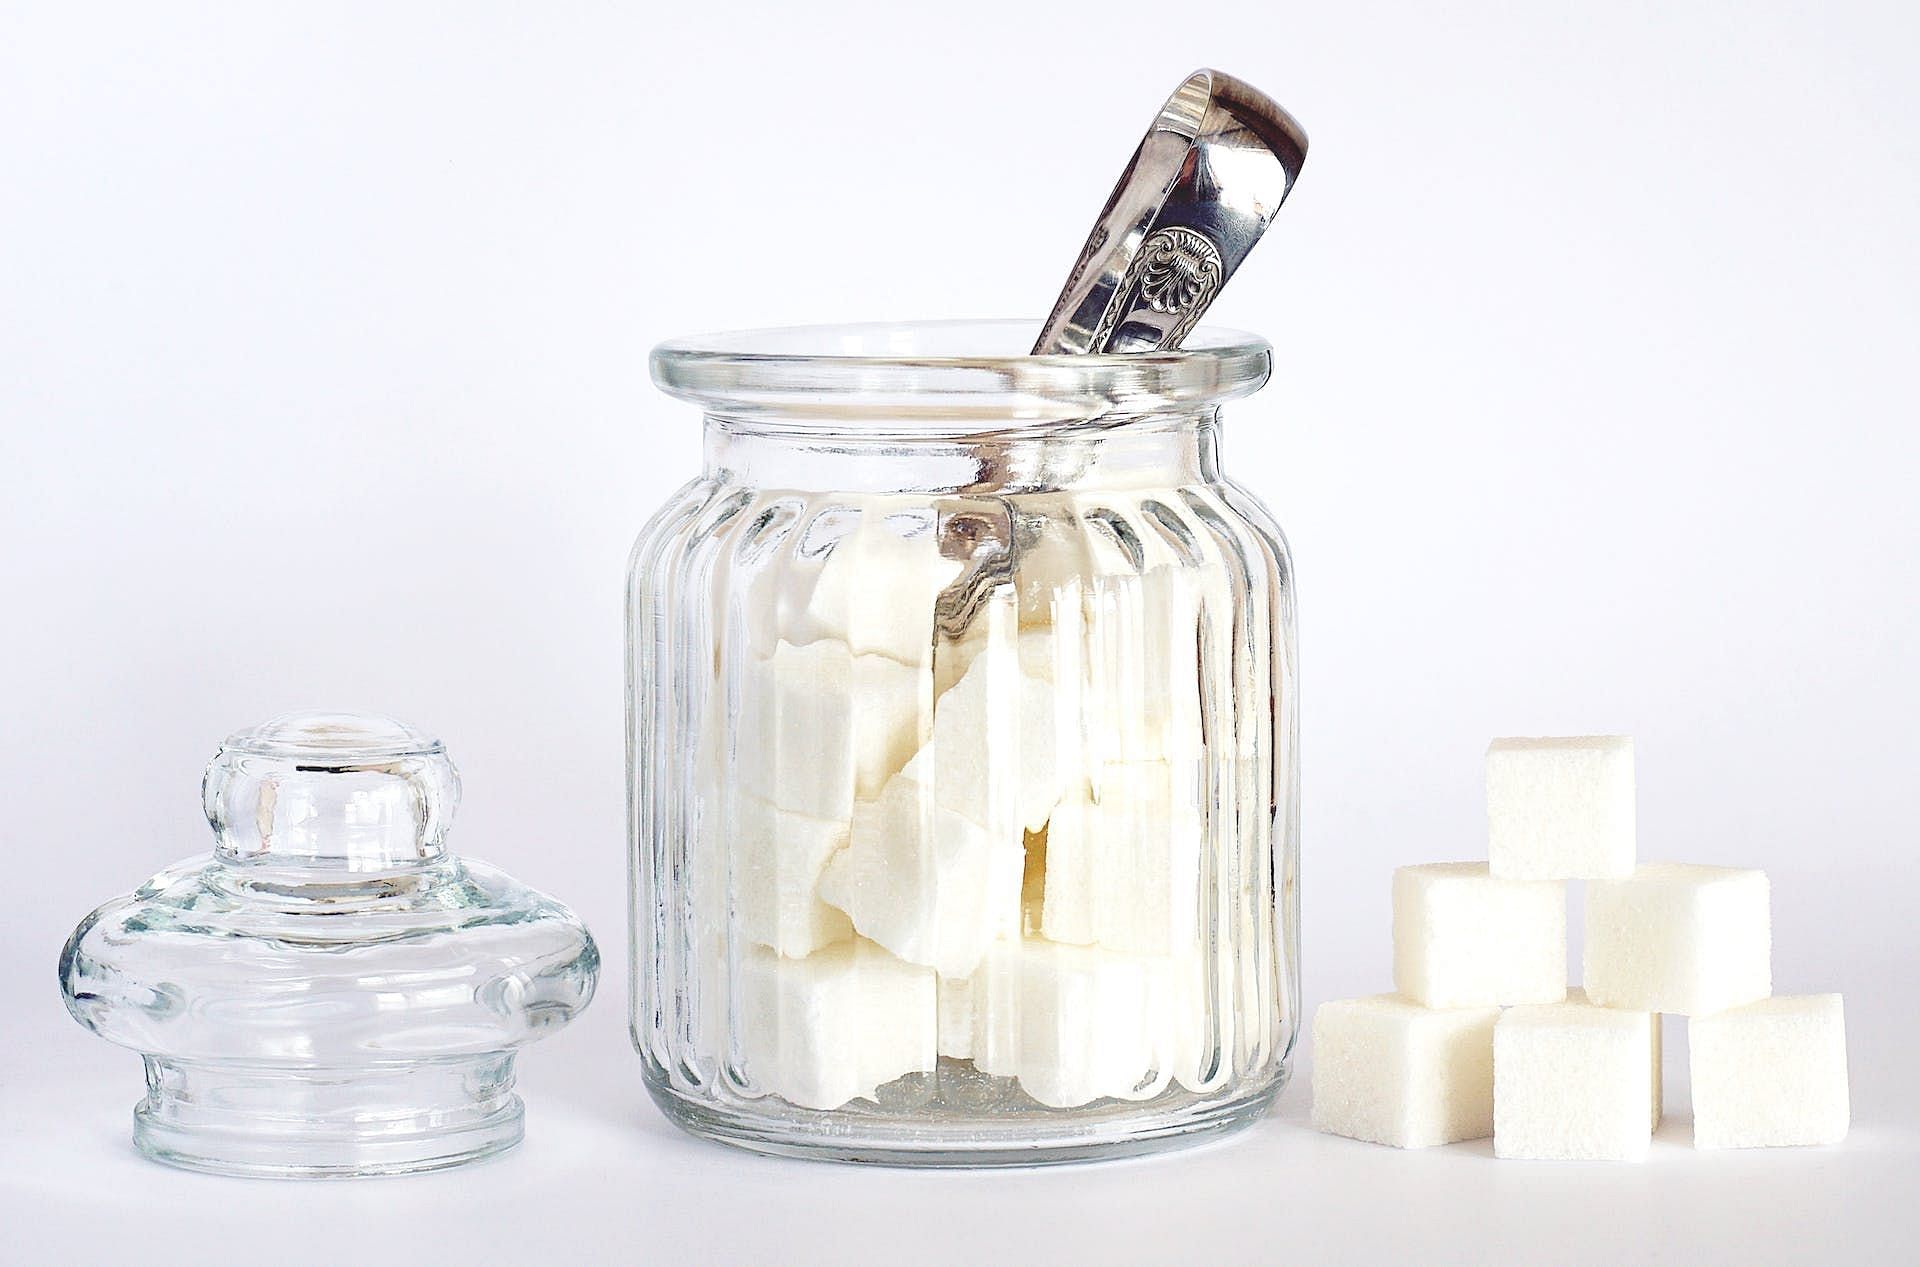 Sugars and sweeteners can cause watery stool. (Image via Pexels/Suzy Hazelwood)